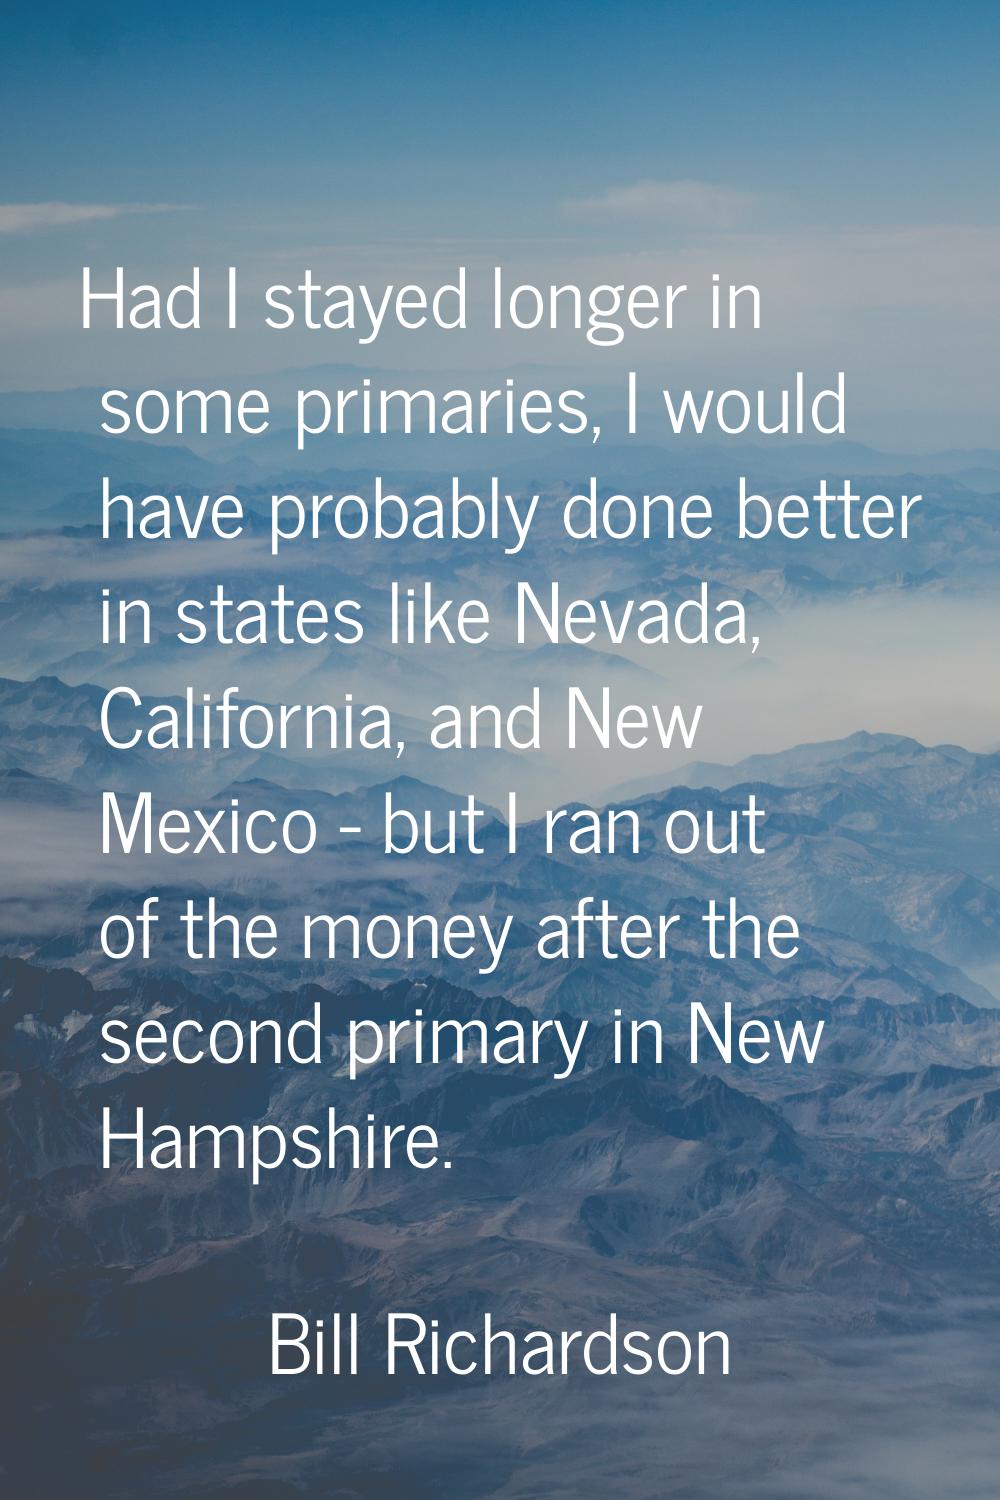 Had I stayed longer in some primaries, I would have probably done better in states like Nevada, Cal